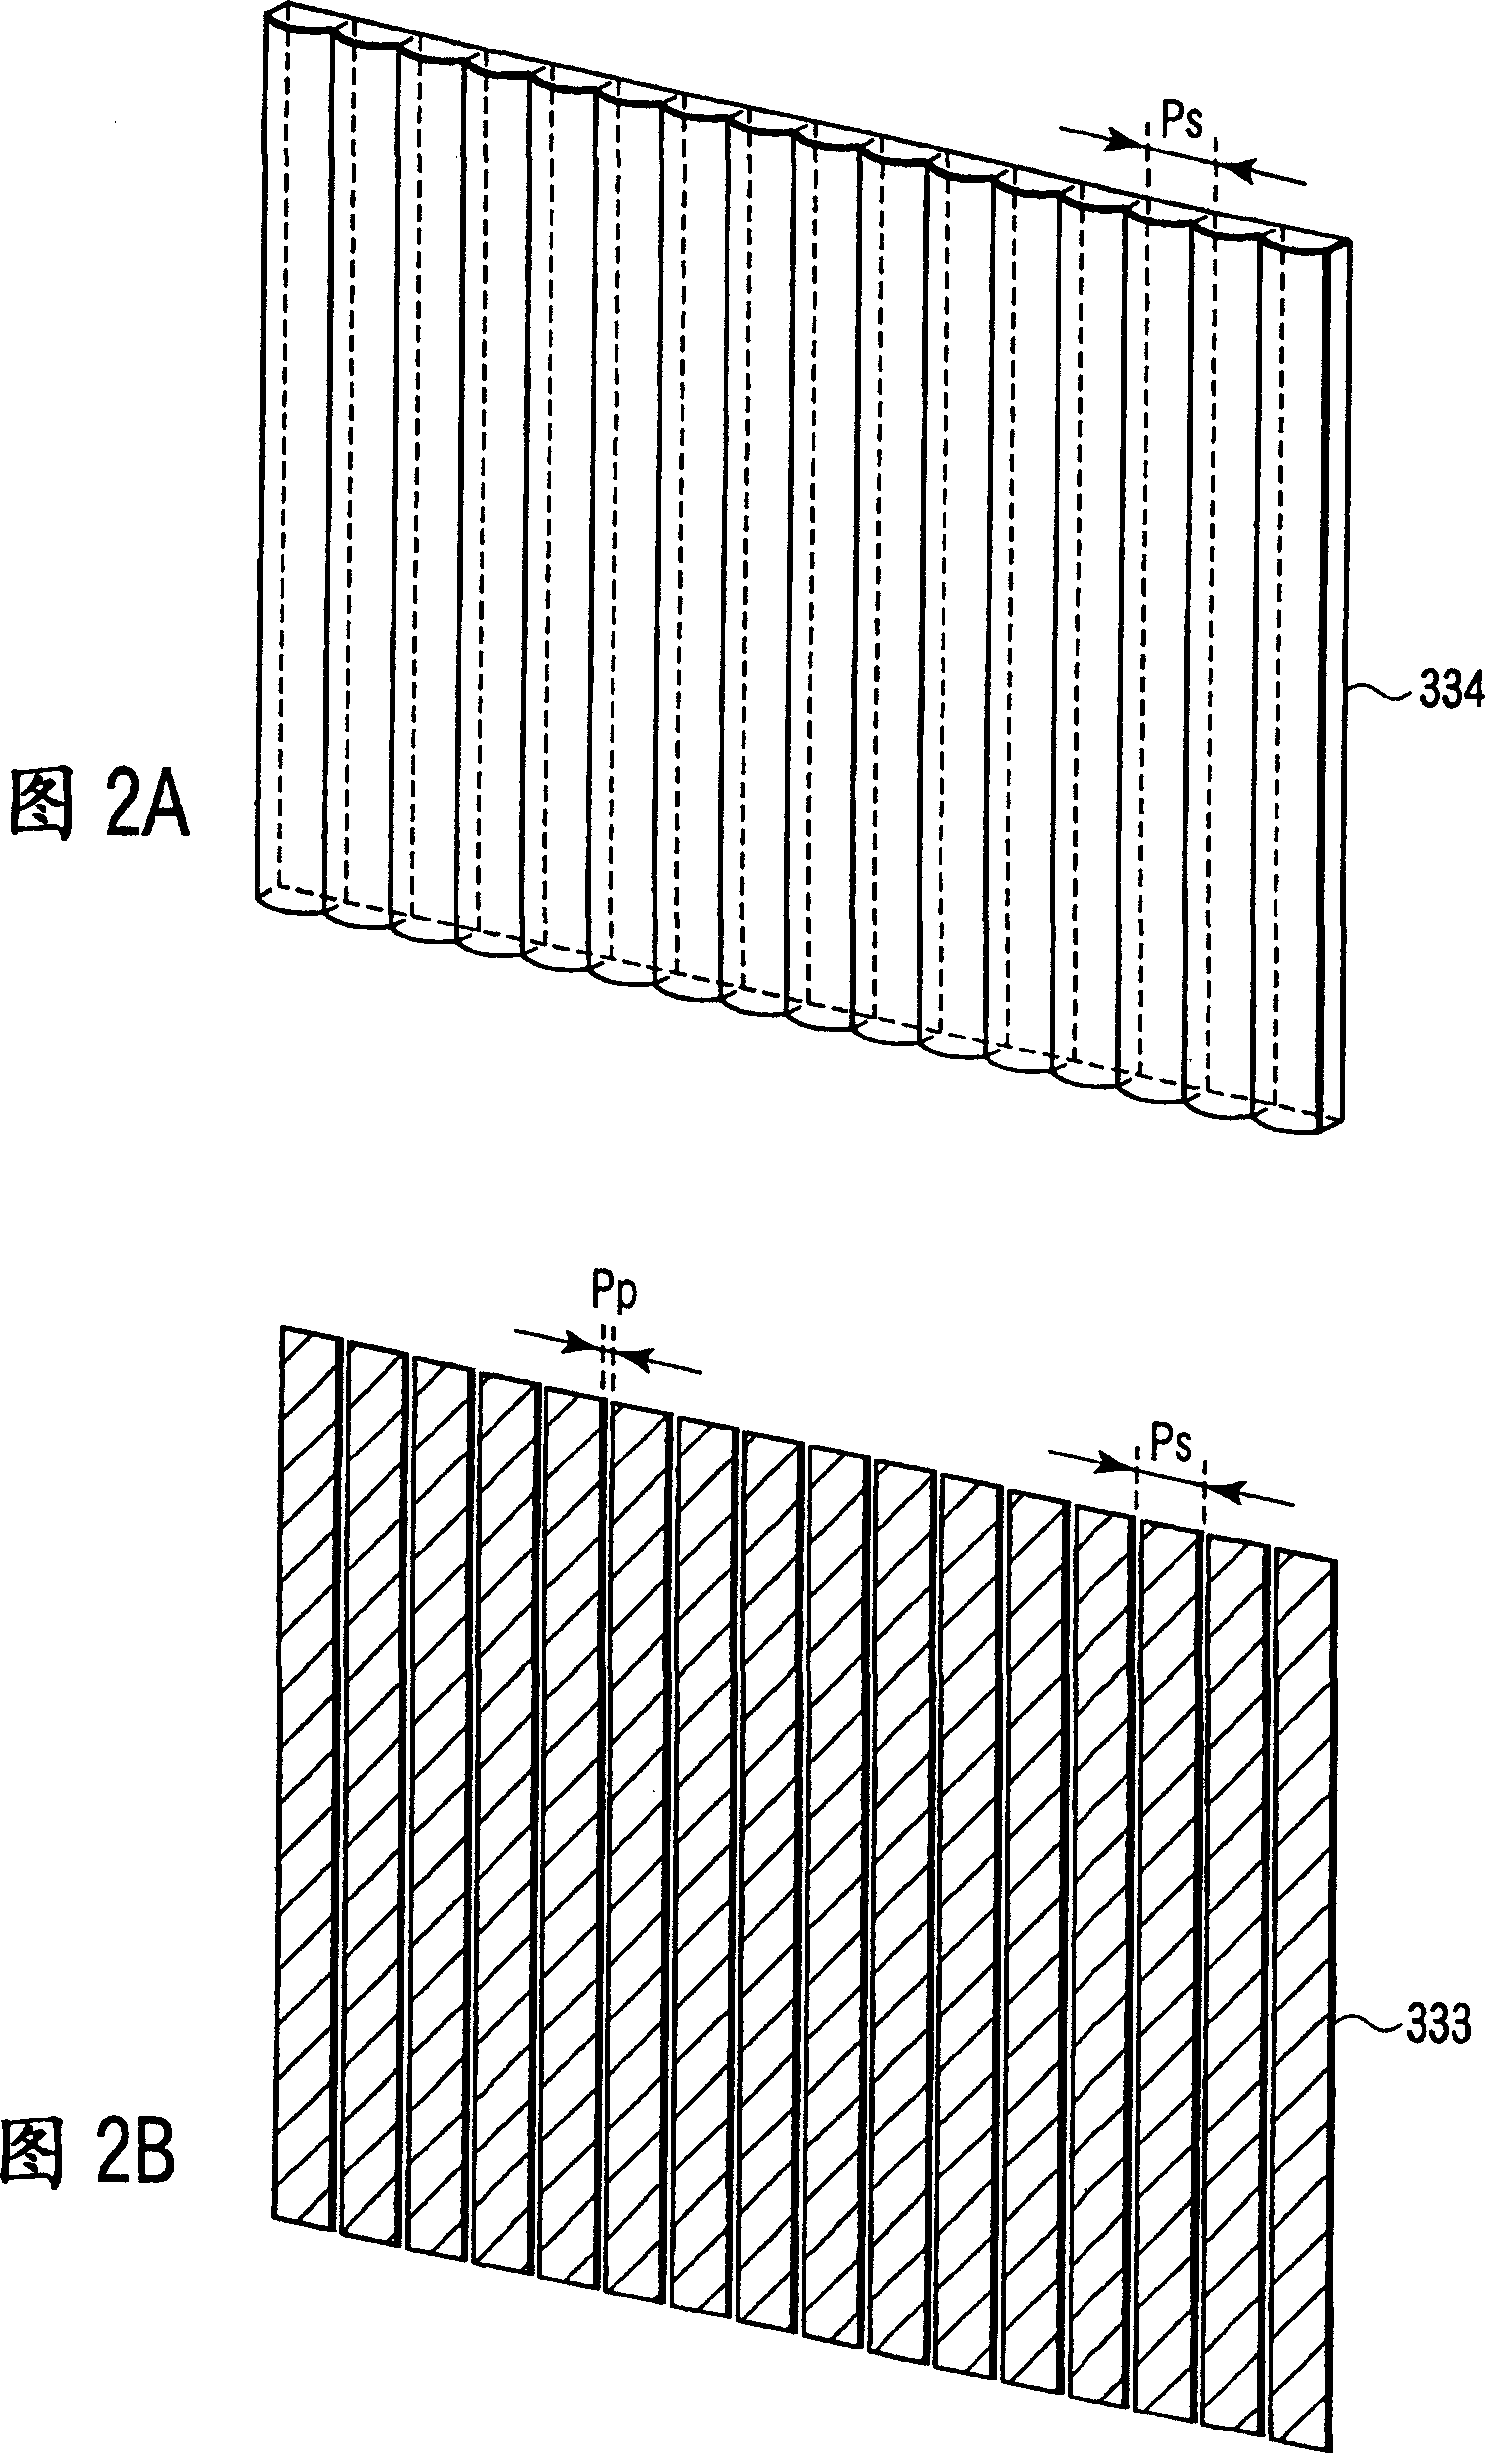 3d image data structure, recording method thereof, and display reproduction method thereof